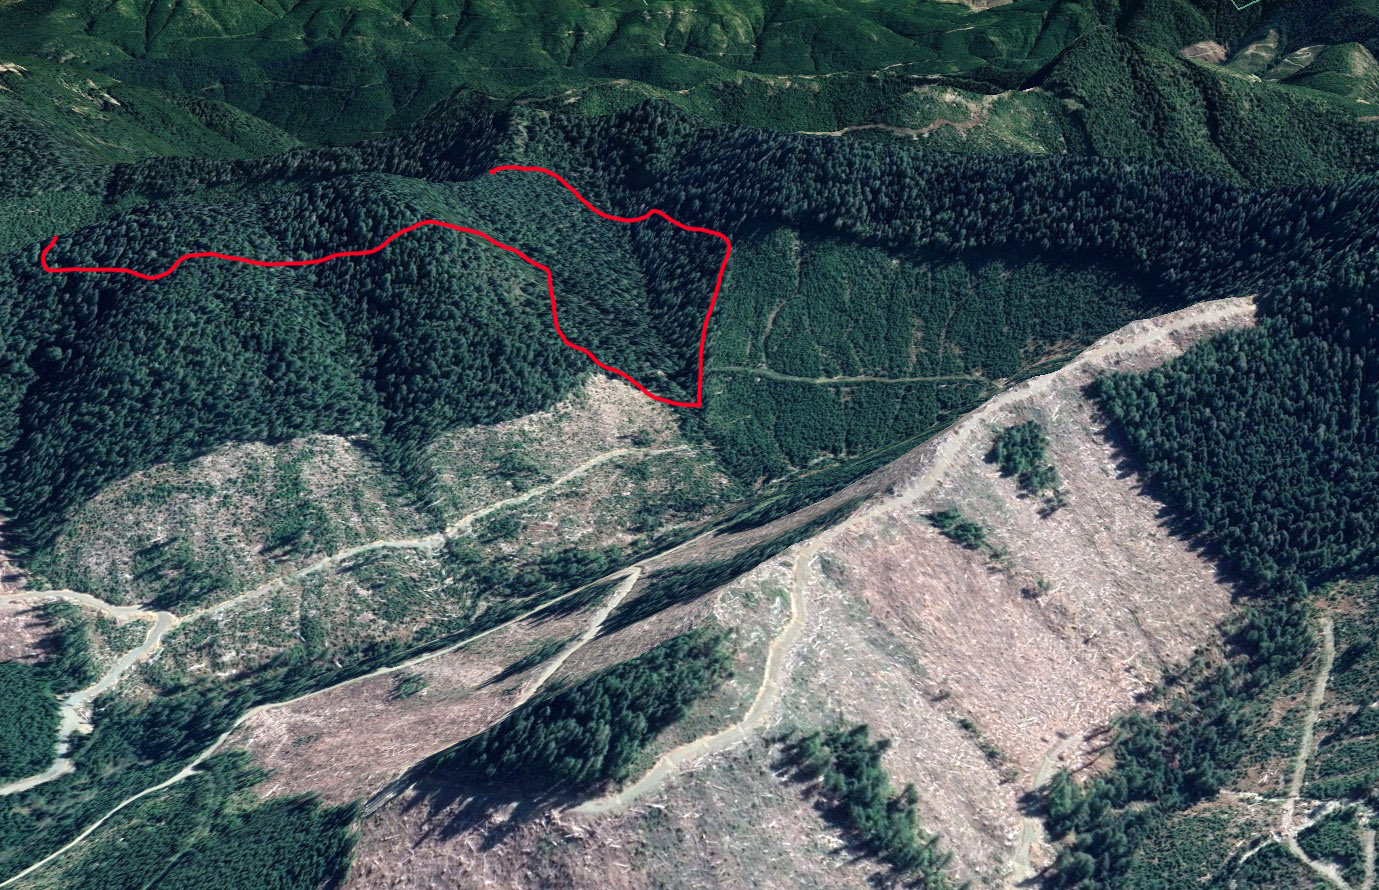 A rough outline of the active Western Forest Products cutblock in the Upper Walbran's 'ABC watershed' region. You can clearly see just how much has already been stripped away here over the past 20-30 years and now they're back to try and take the best of what little remains.